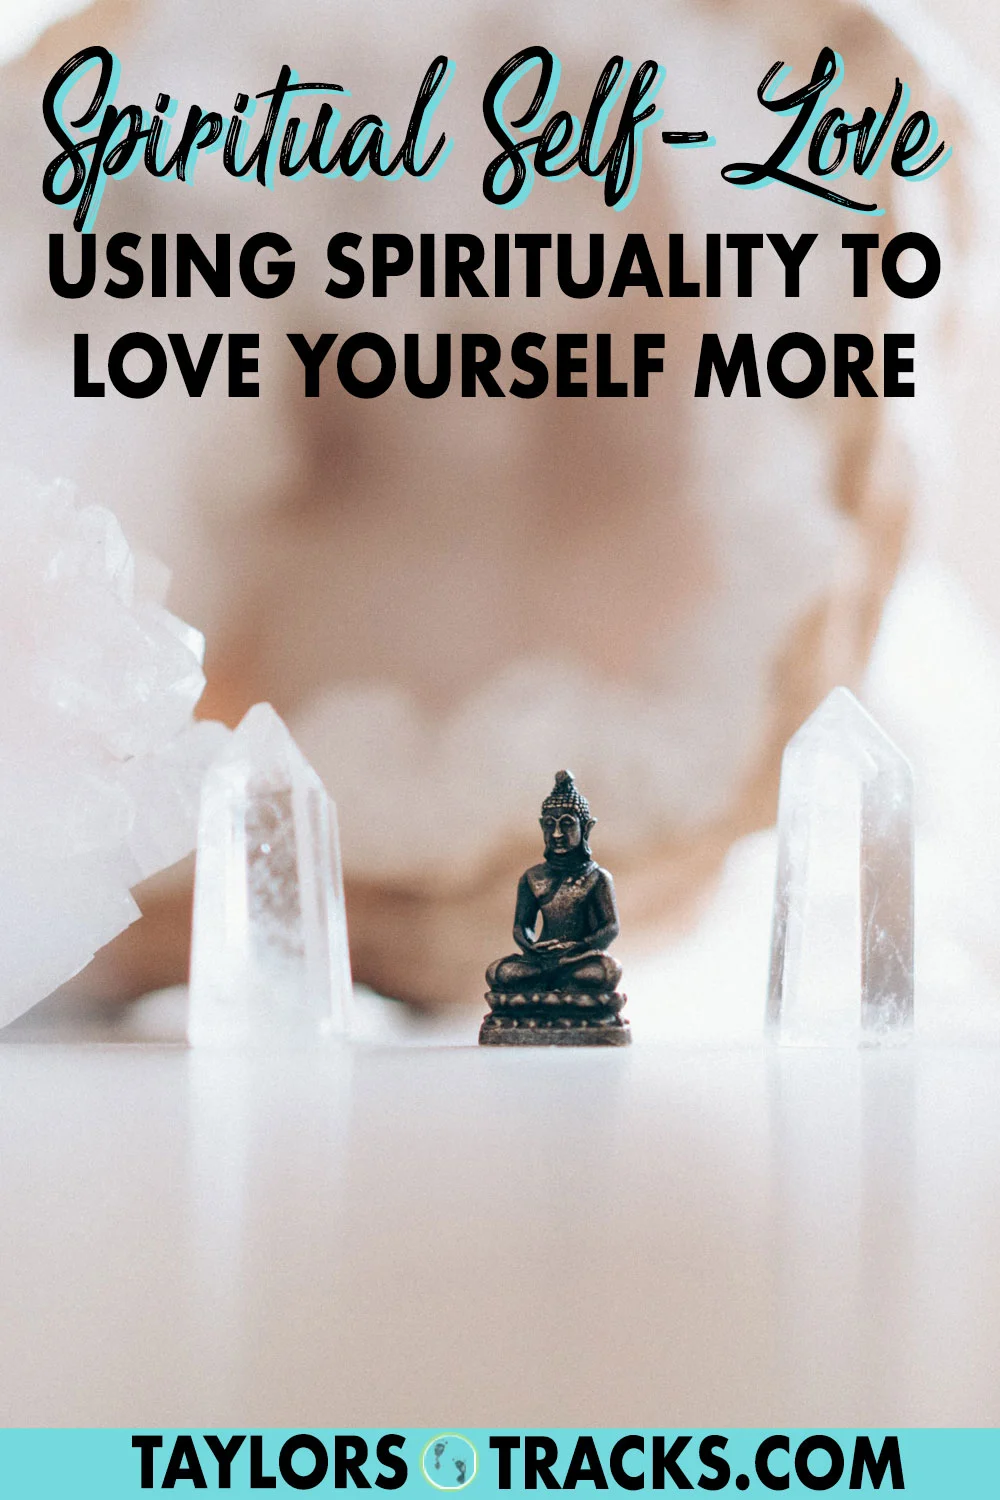 Spiritual self-love allows you to gain a deeper understanding and connection to yourself using simple spiritual practices. These 10 practices will develop your self-love, self-care and leave you with a sense of feeling at peace and whole. Click to discover how to become more spiritual and self-loving.